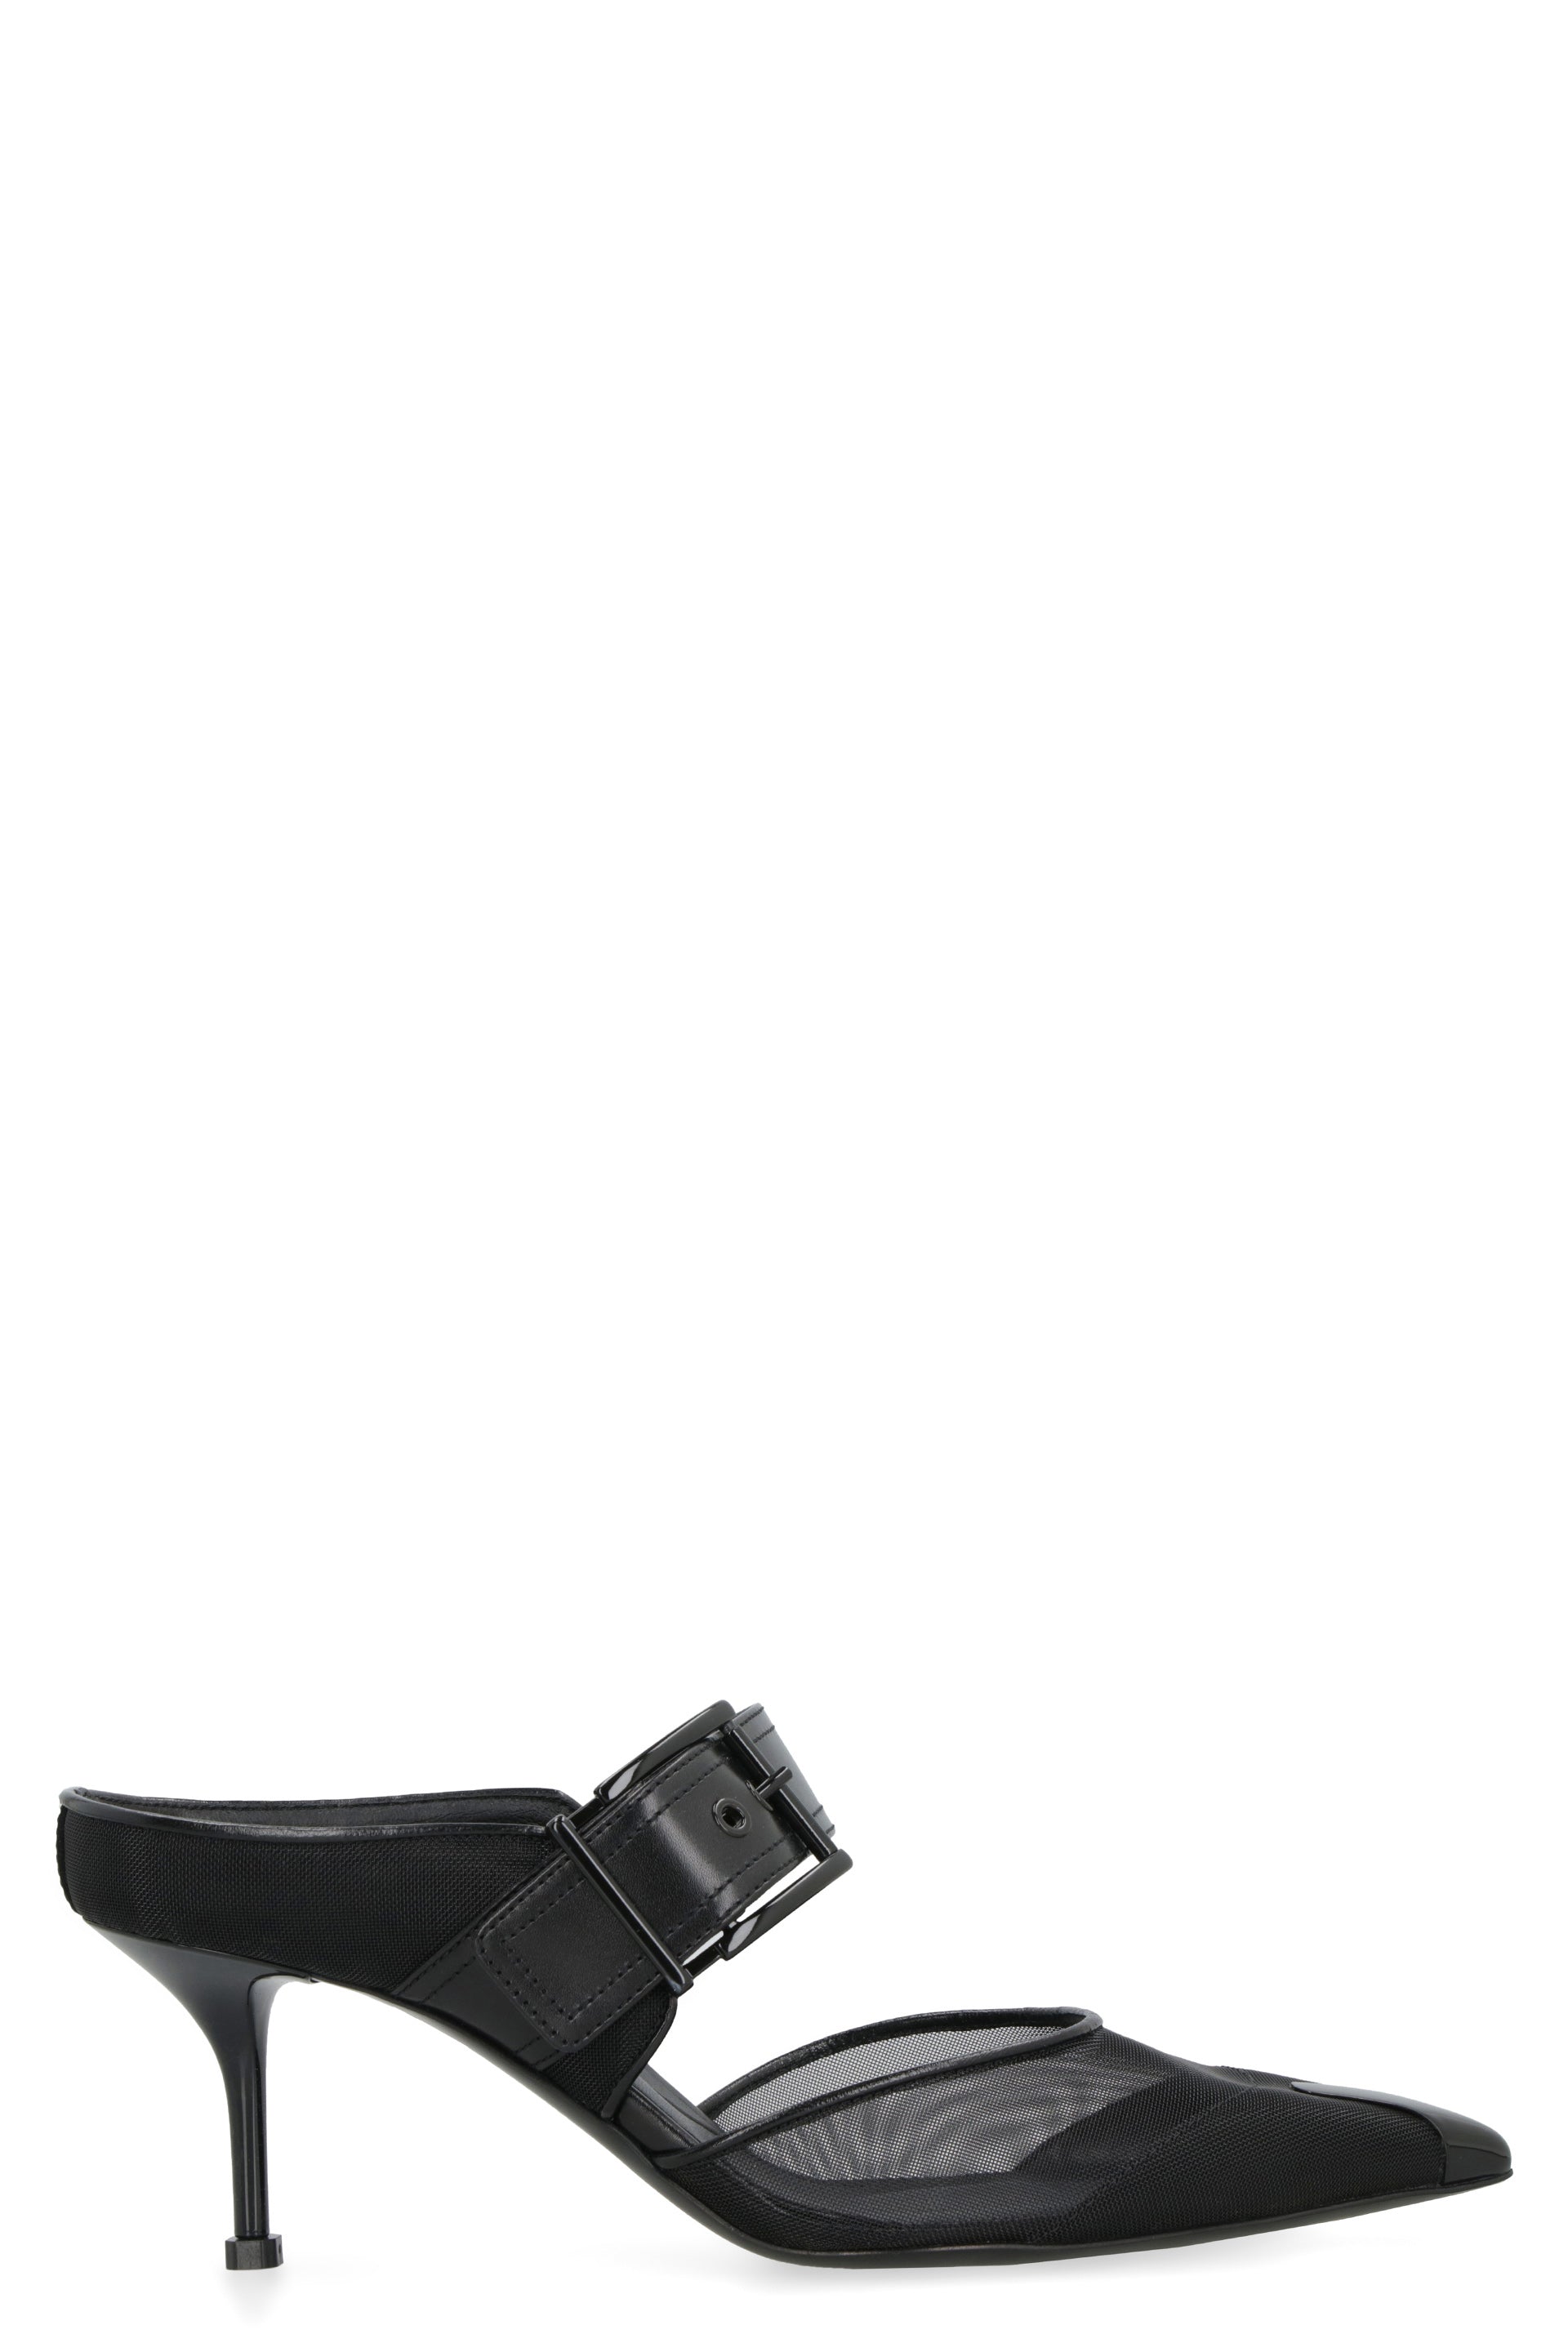 Alexander Mcqueen Black Pointy Toe Leather Sandals